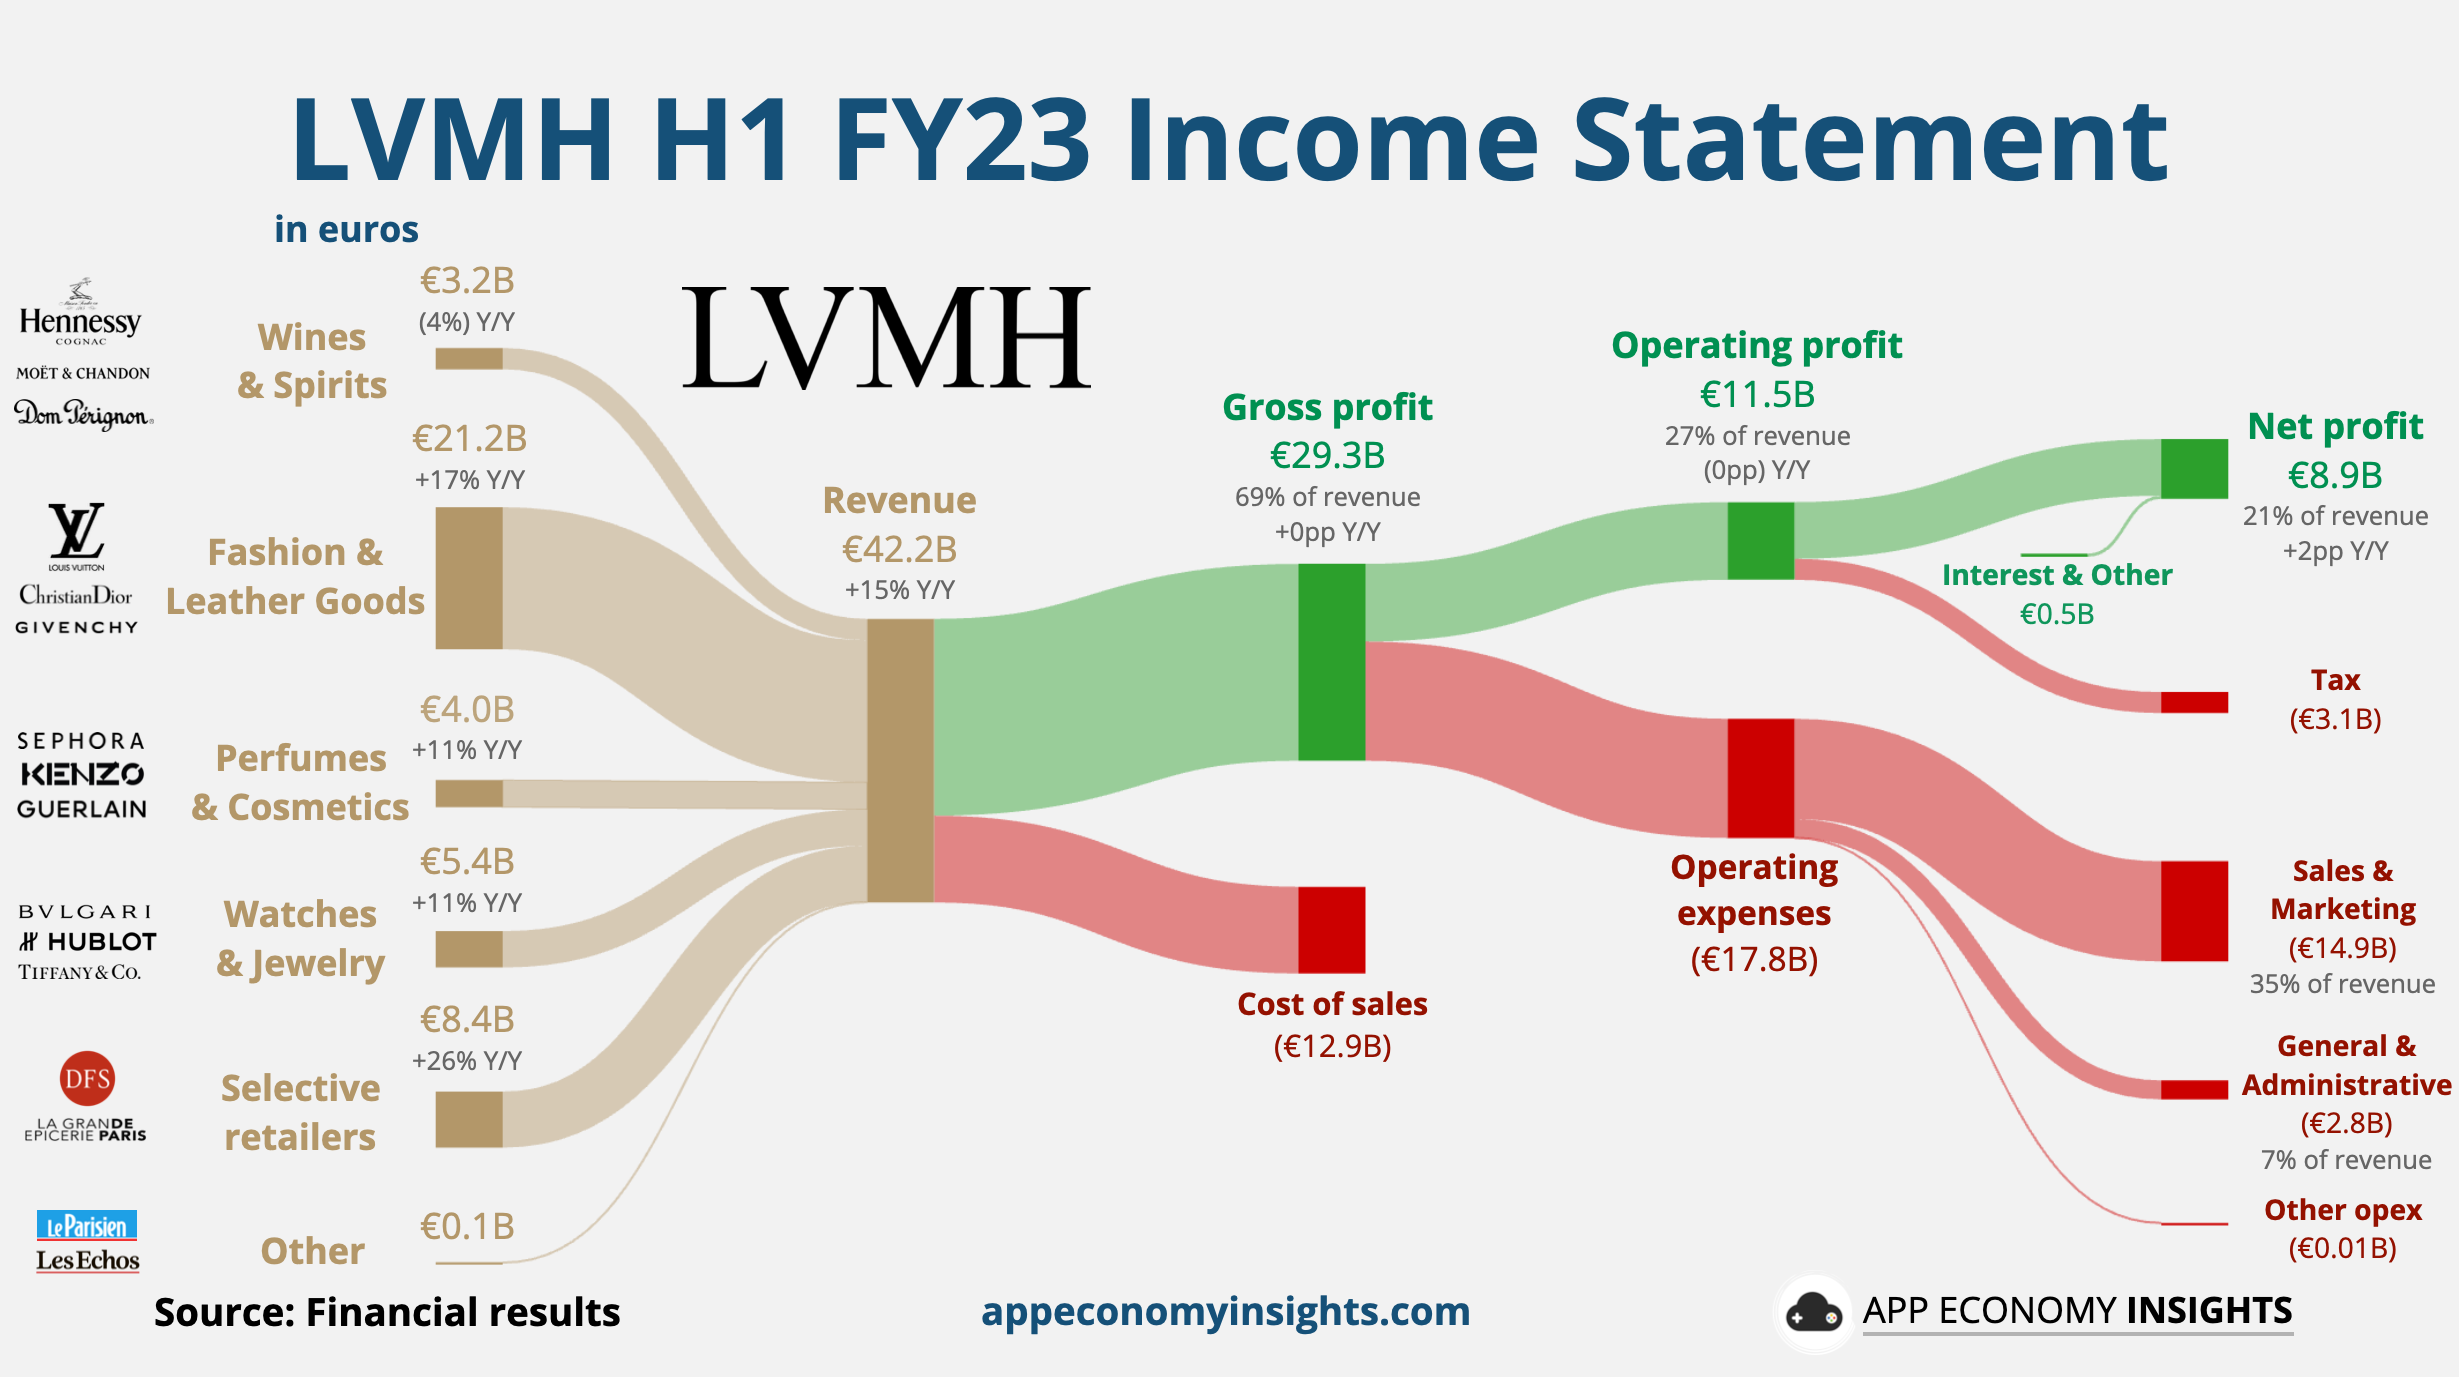 DFS recovery continues as LVMH posts 14% growth